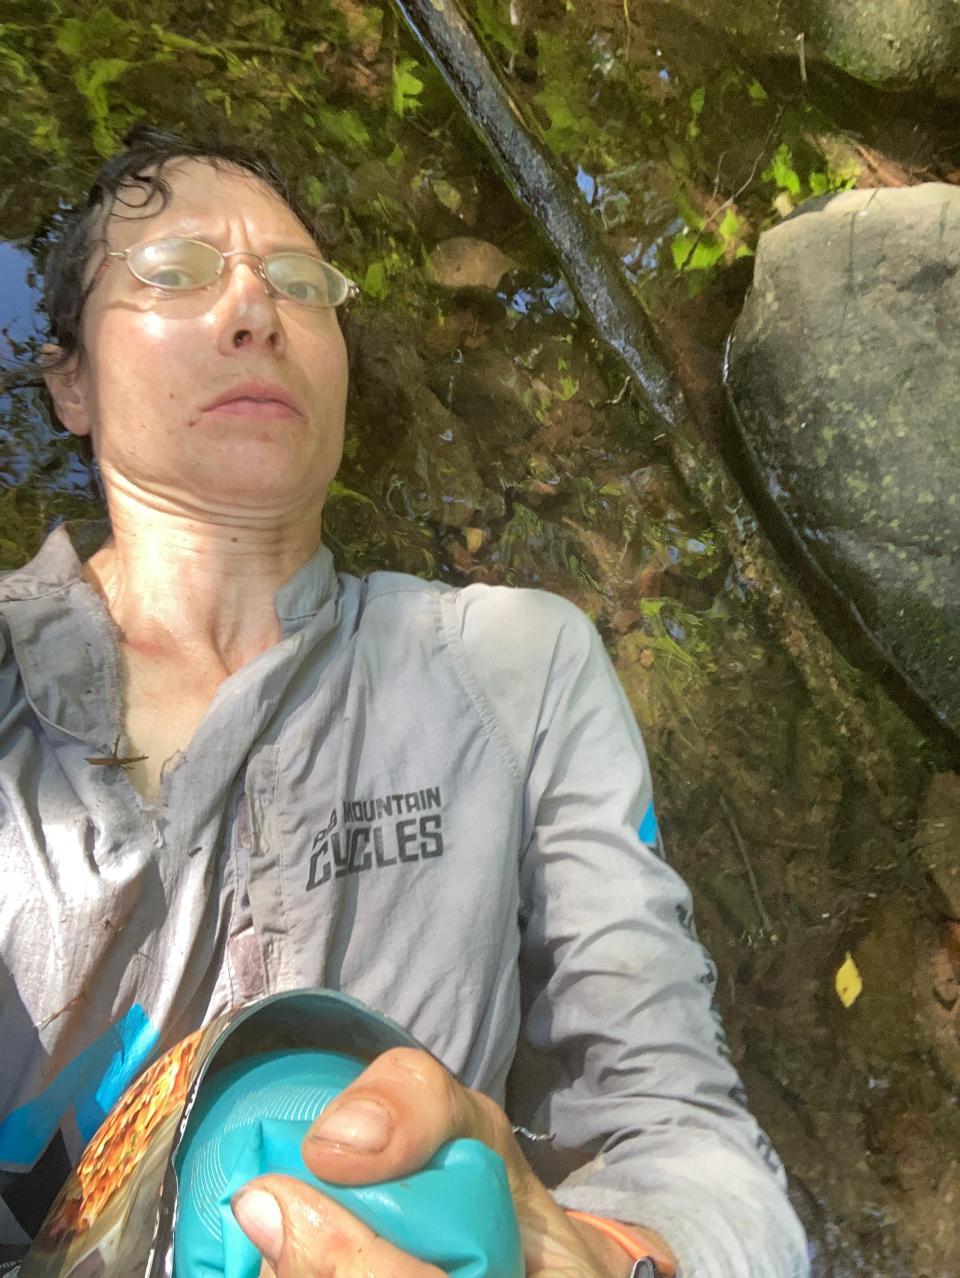 Andrea Larson lies in a shallow stream while attempting a speed record on the Superior Hiking Trail. The heat was her biggest obstacle, so she would cool off when she could.